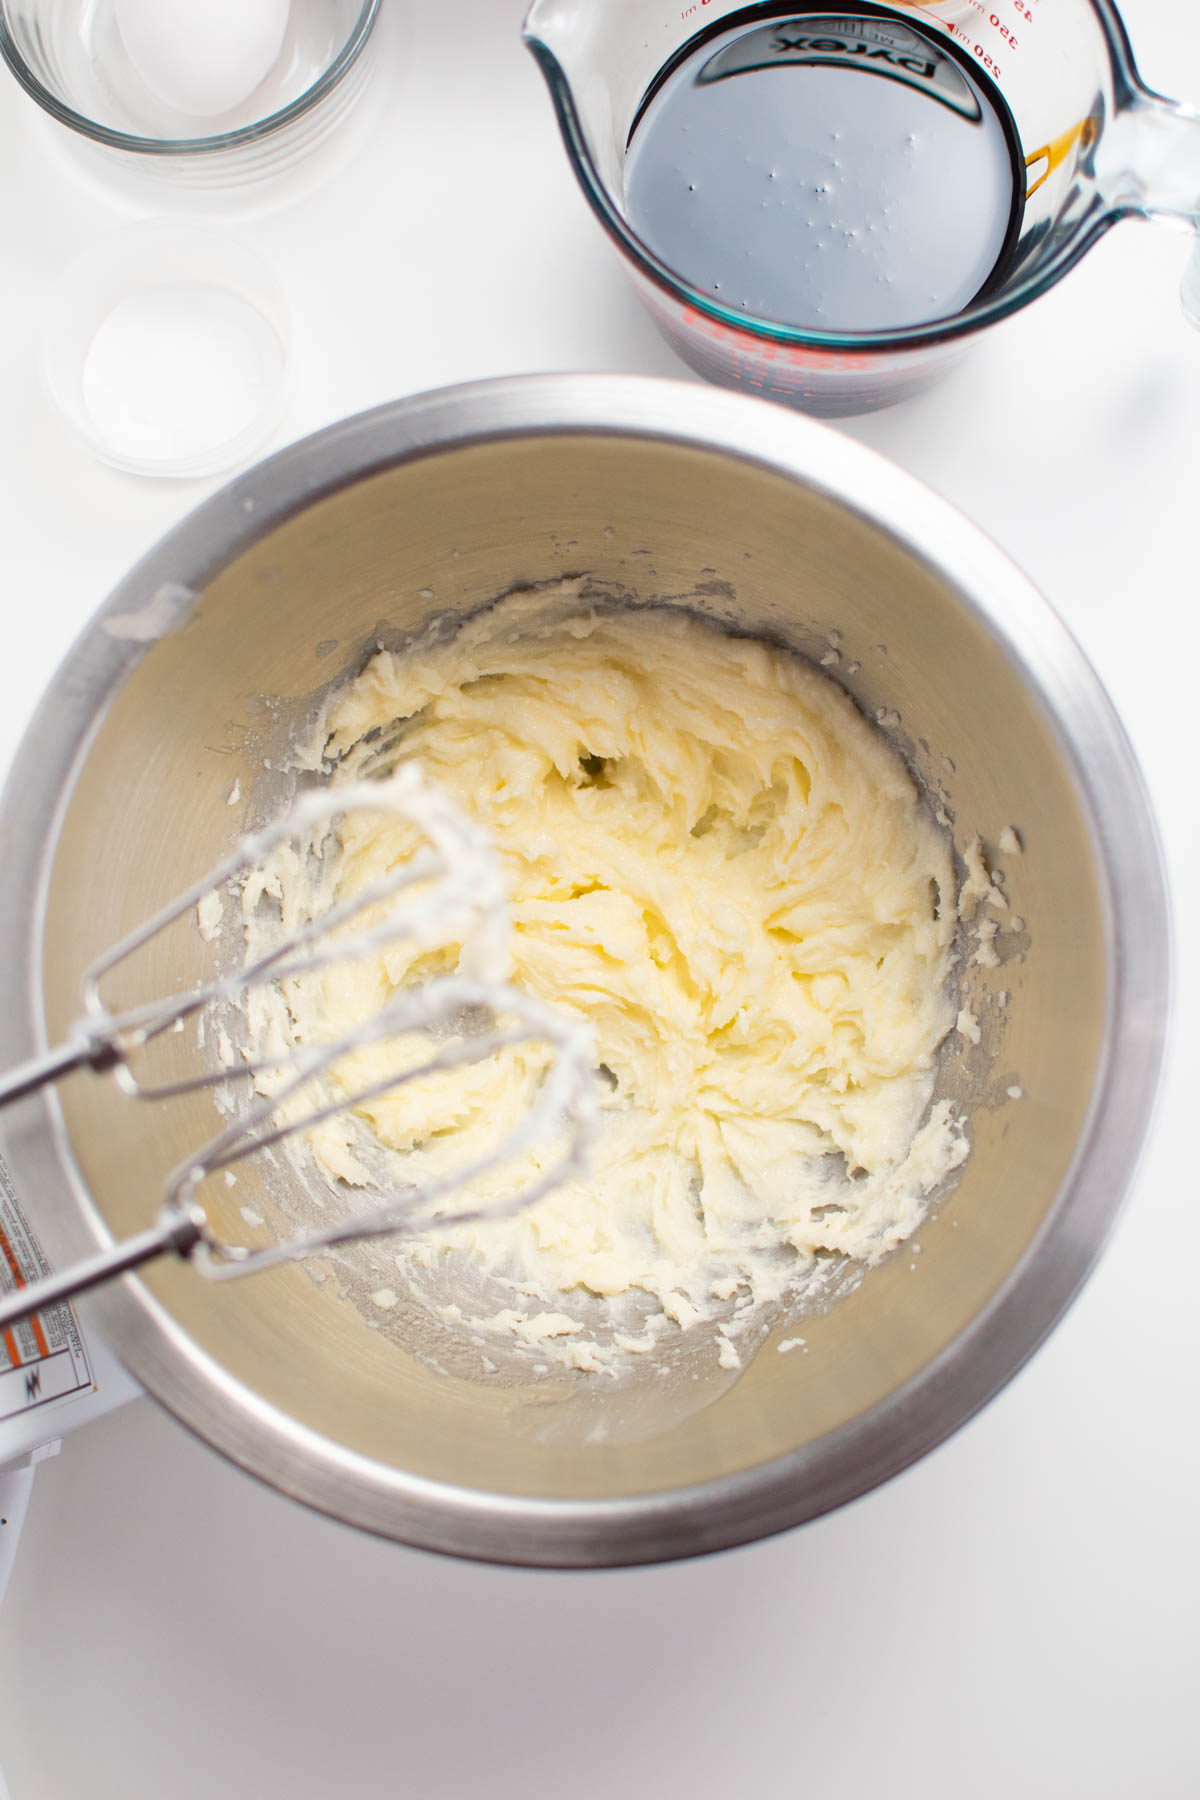 Creamed butter and sugar in metal mixing bowl with electric beaters overhead.